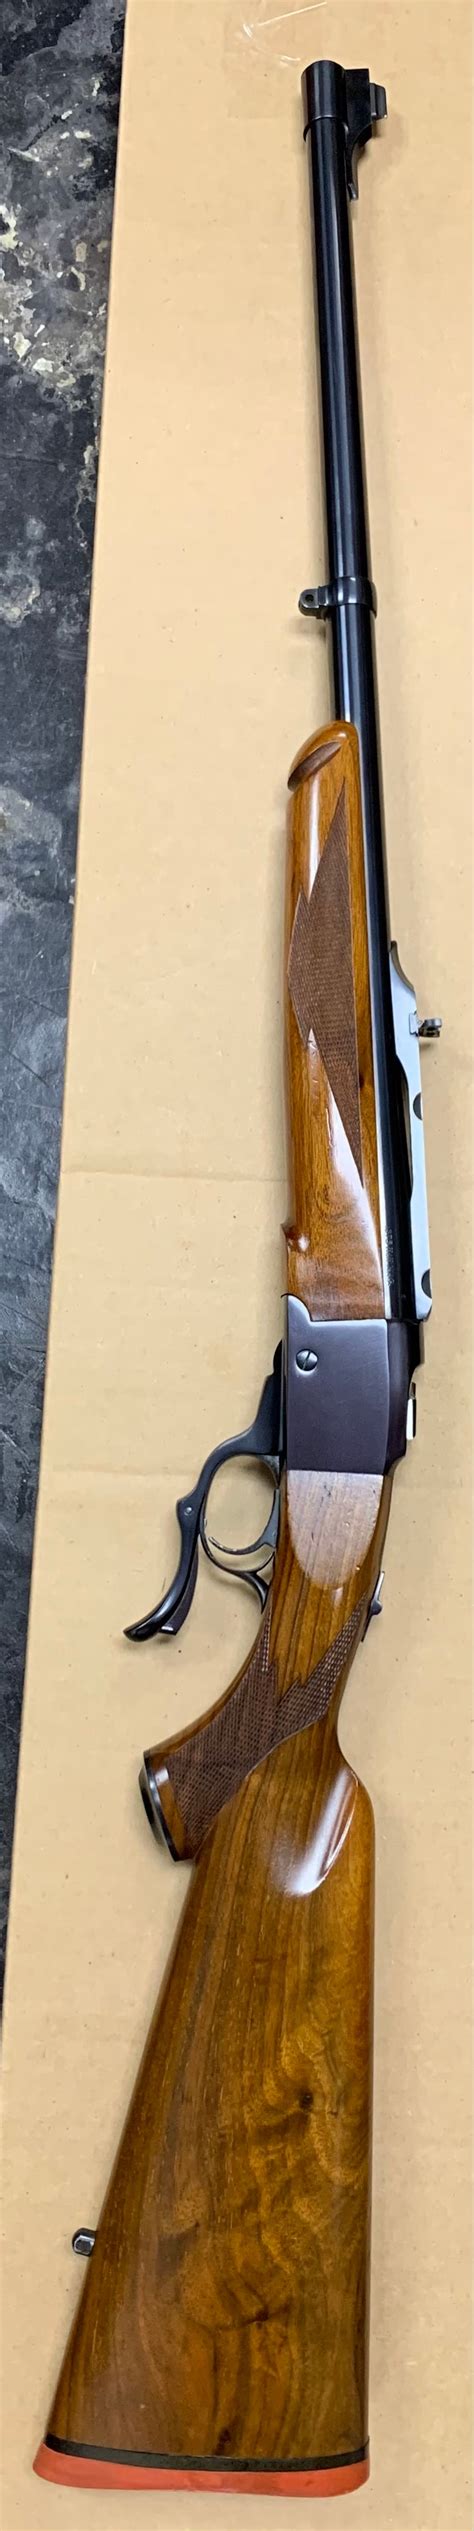 Ruger No 1 Tropical Rifle For Sale